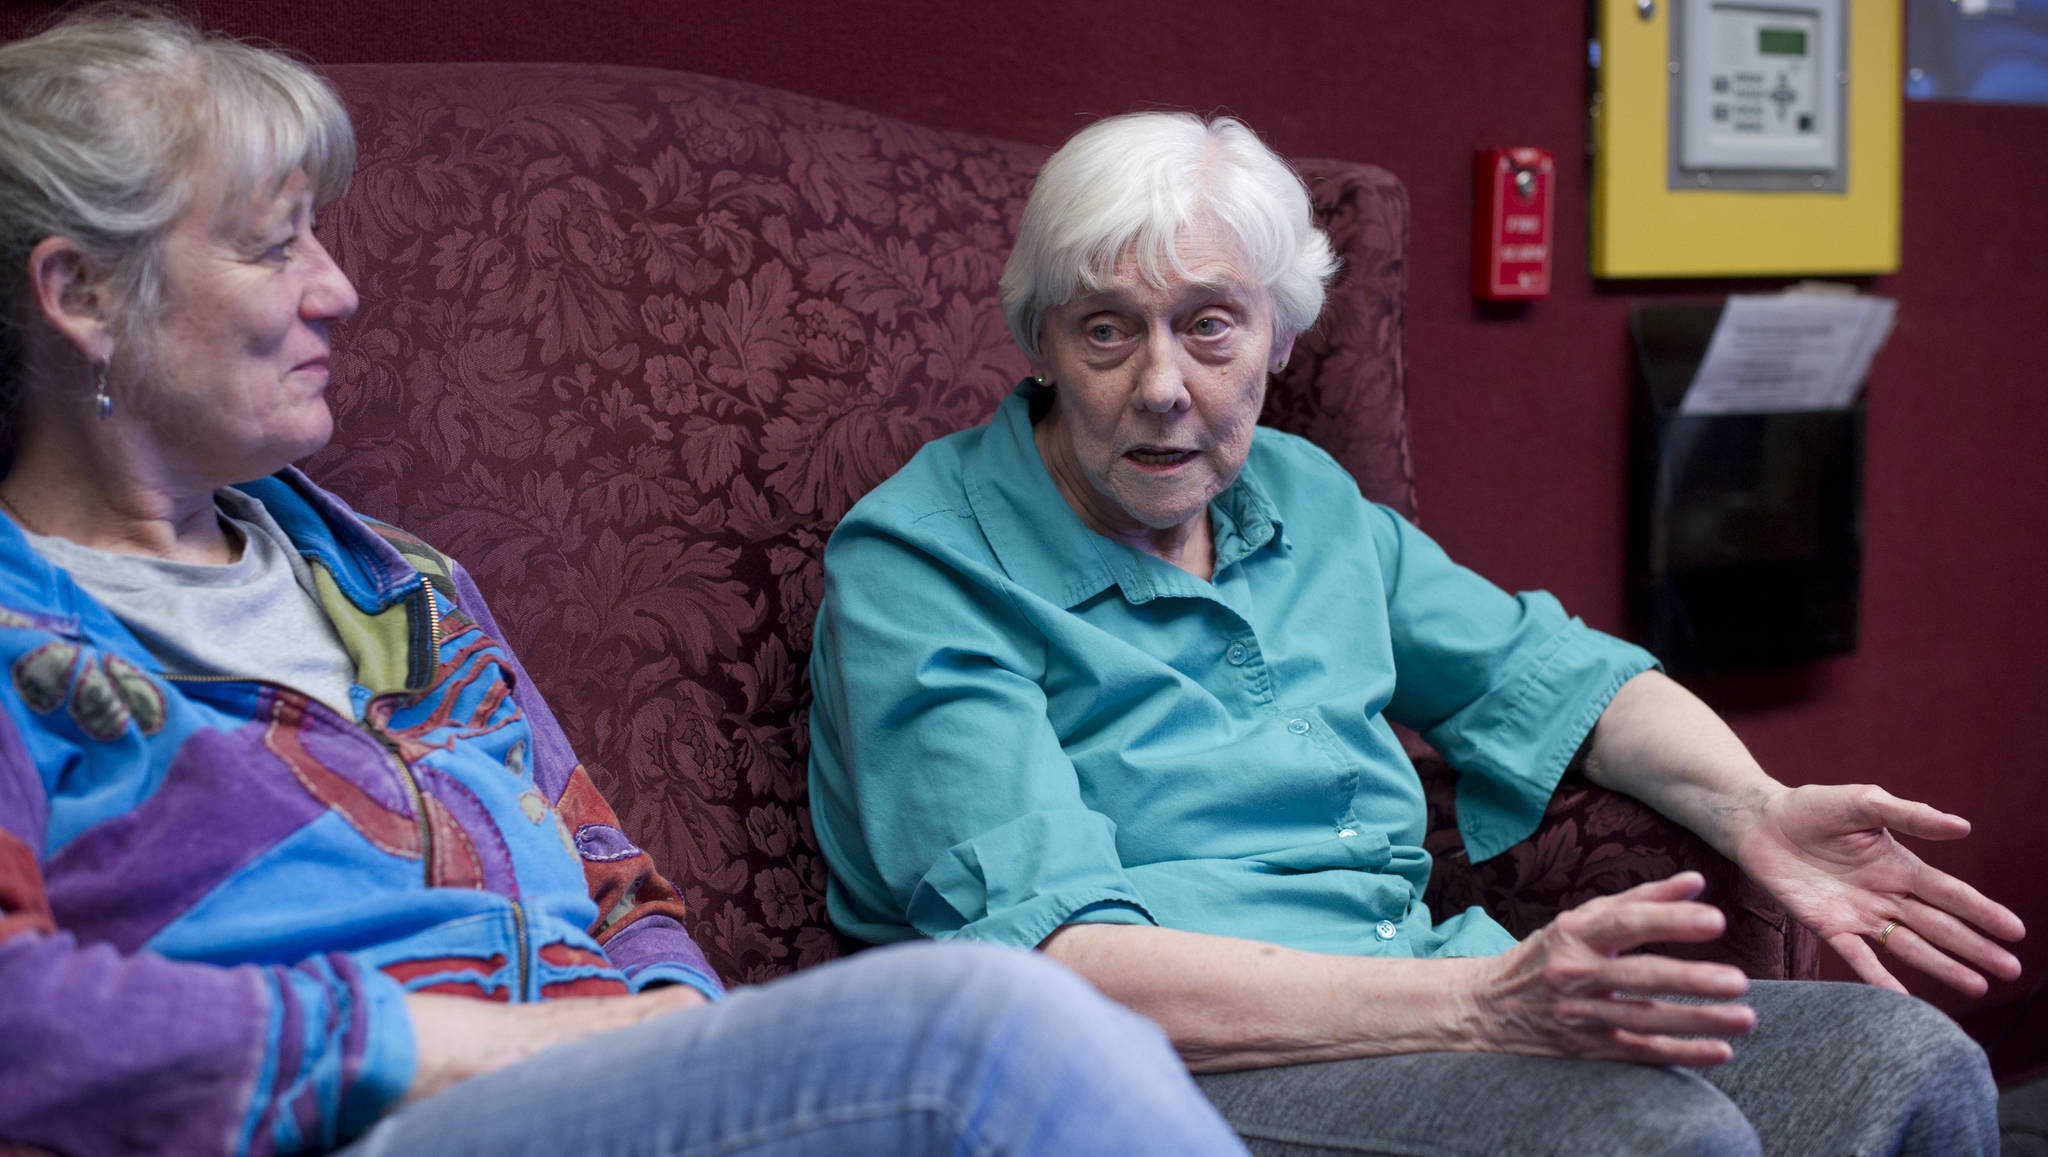 Juneau Pioneer Home resident Phyllis Woodman, right, talks about the grief caused by the Legislature’s proposed budget cuts to the home’s residents and staff on Tuesday, April 11, 2017. A resident of the home for four years, Woodman was being visited by Carol Schriver, left. (Michael Penn | Juneau Empire)